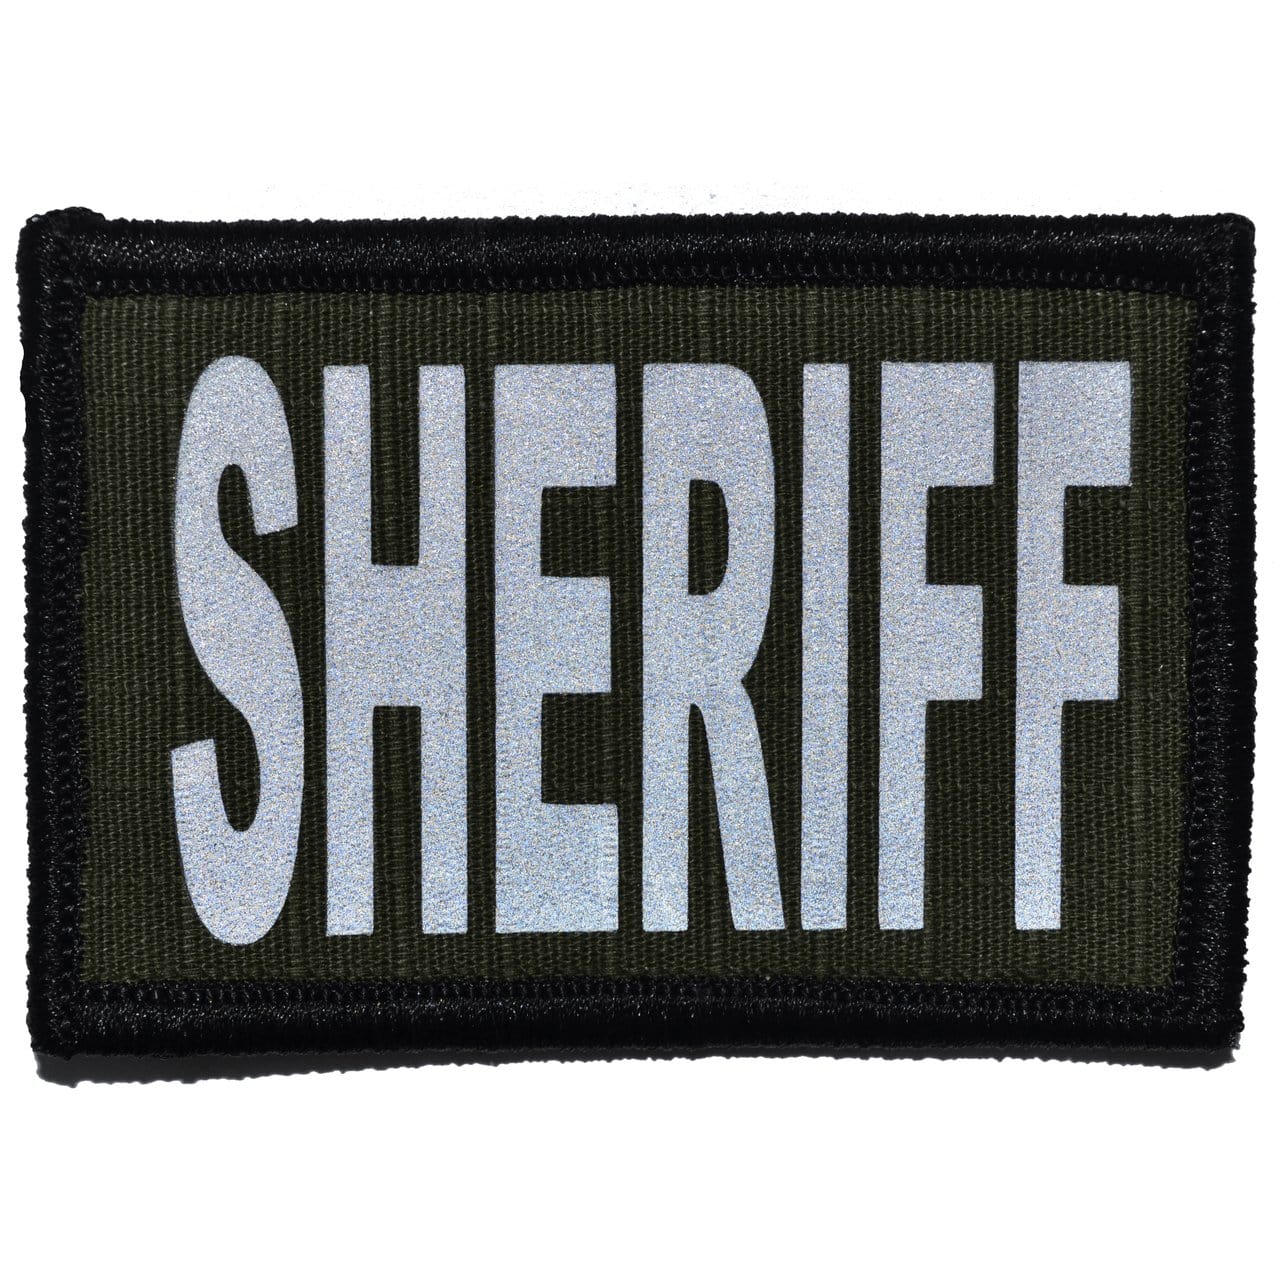 Tactical Gear Junkie Patches Olive Drab Sheriff Reflective - 2x3 Patch